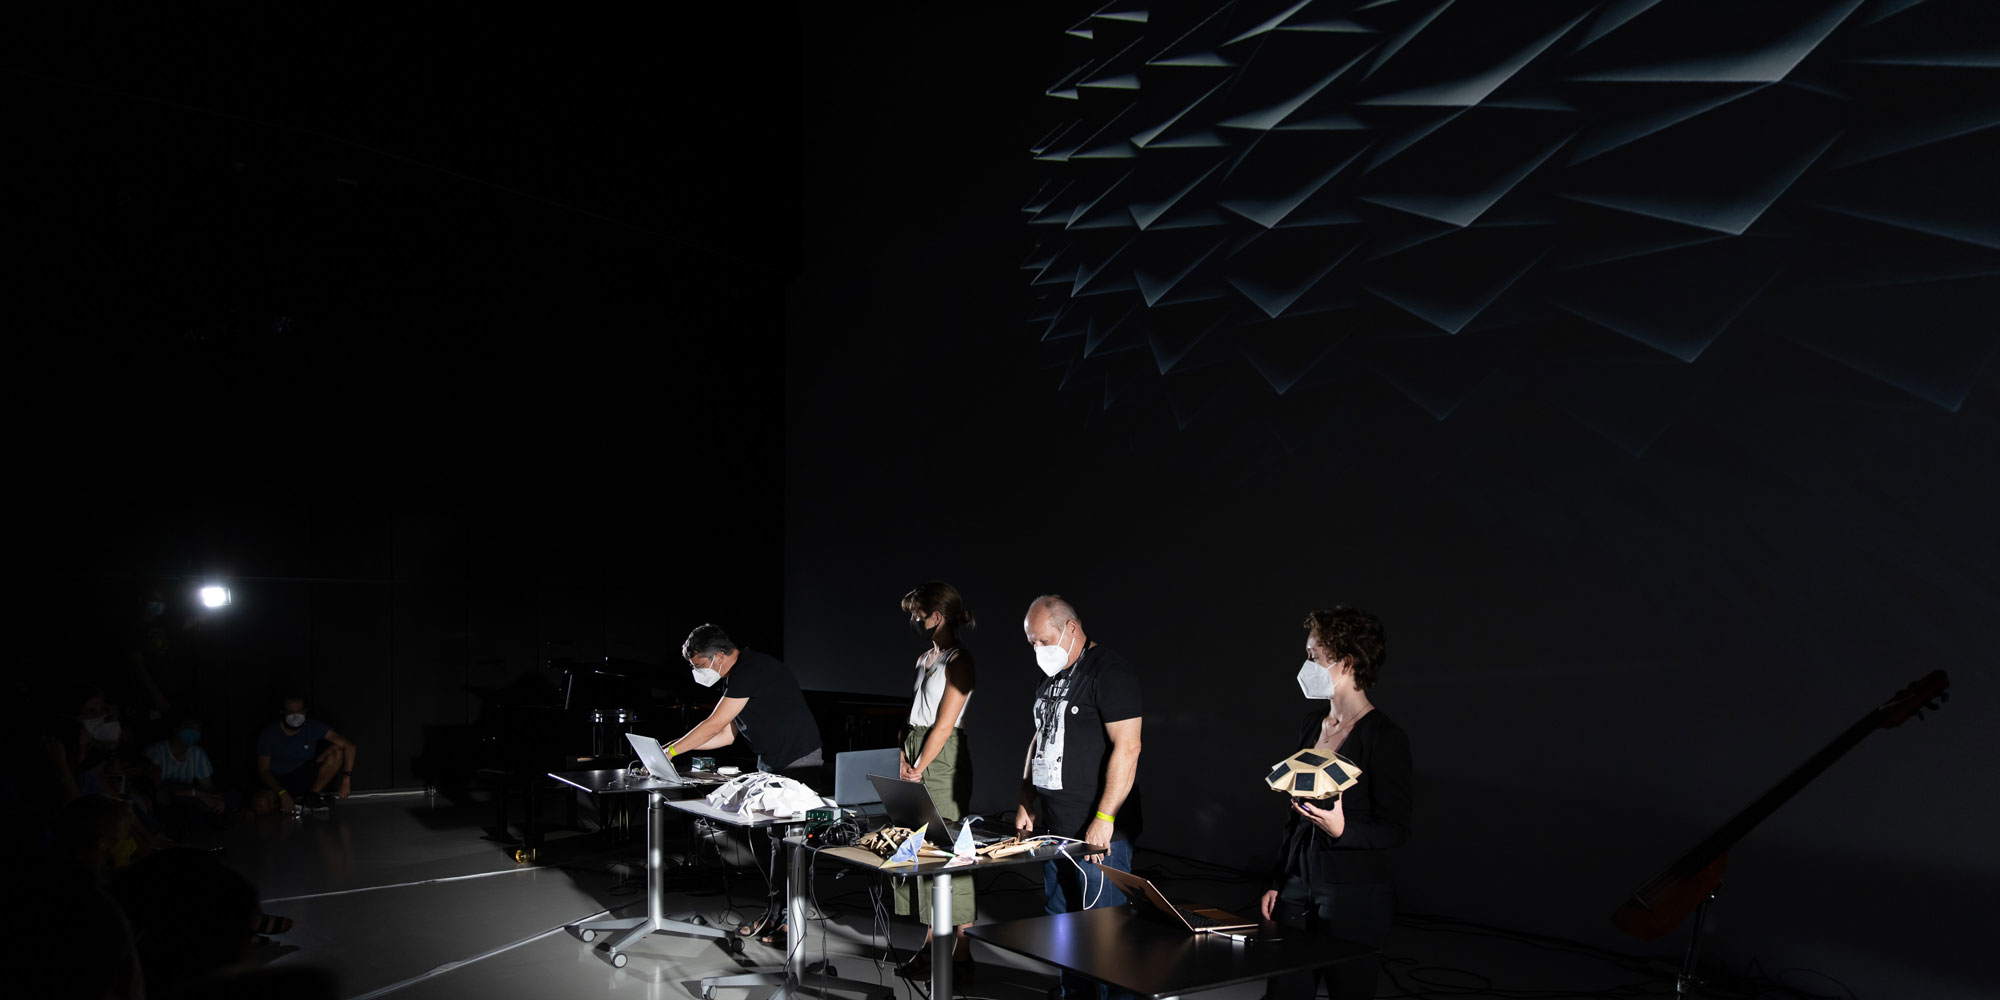 These prototypes for Electronic Origami Instruments were produced in a multi-part workshop with Anna Oelsch. During the Night Performances, the participants wowed the audience with the sound of hybrid art at the intersection of origami and robotics.